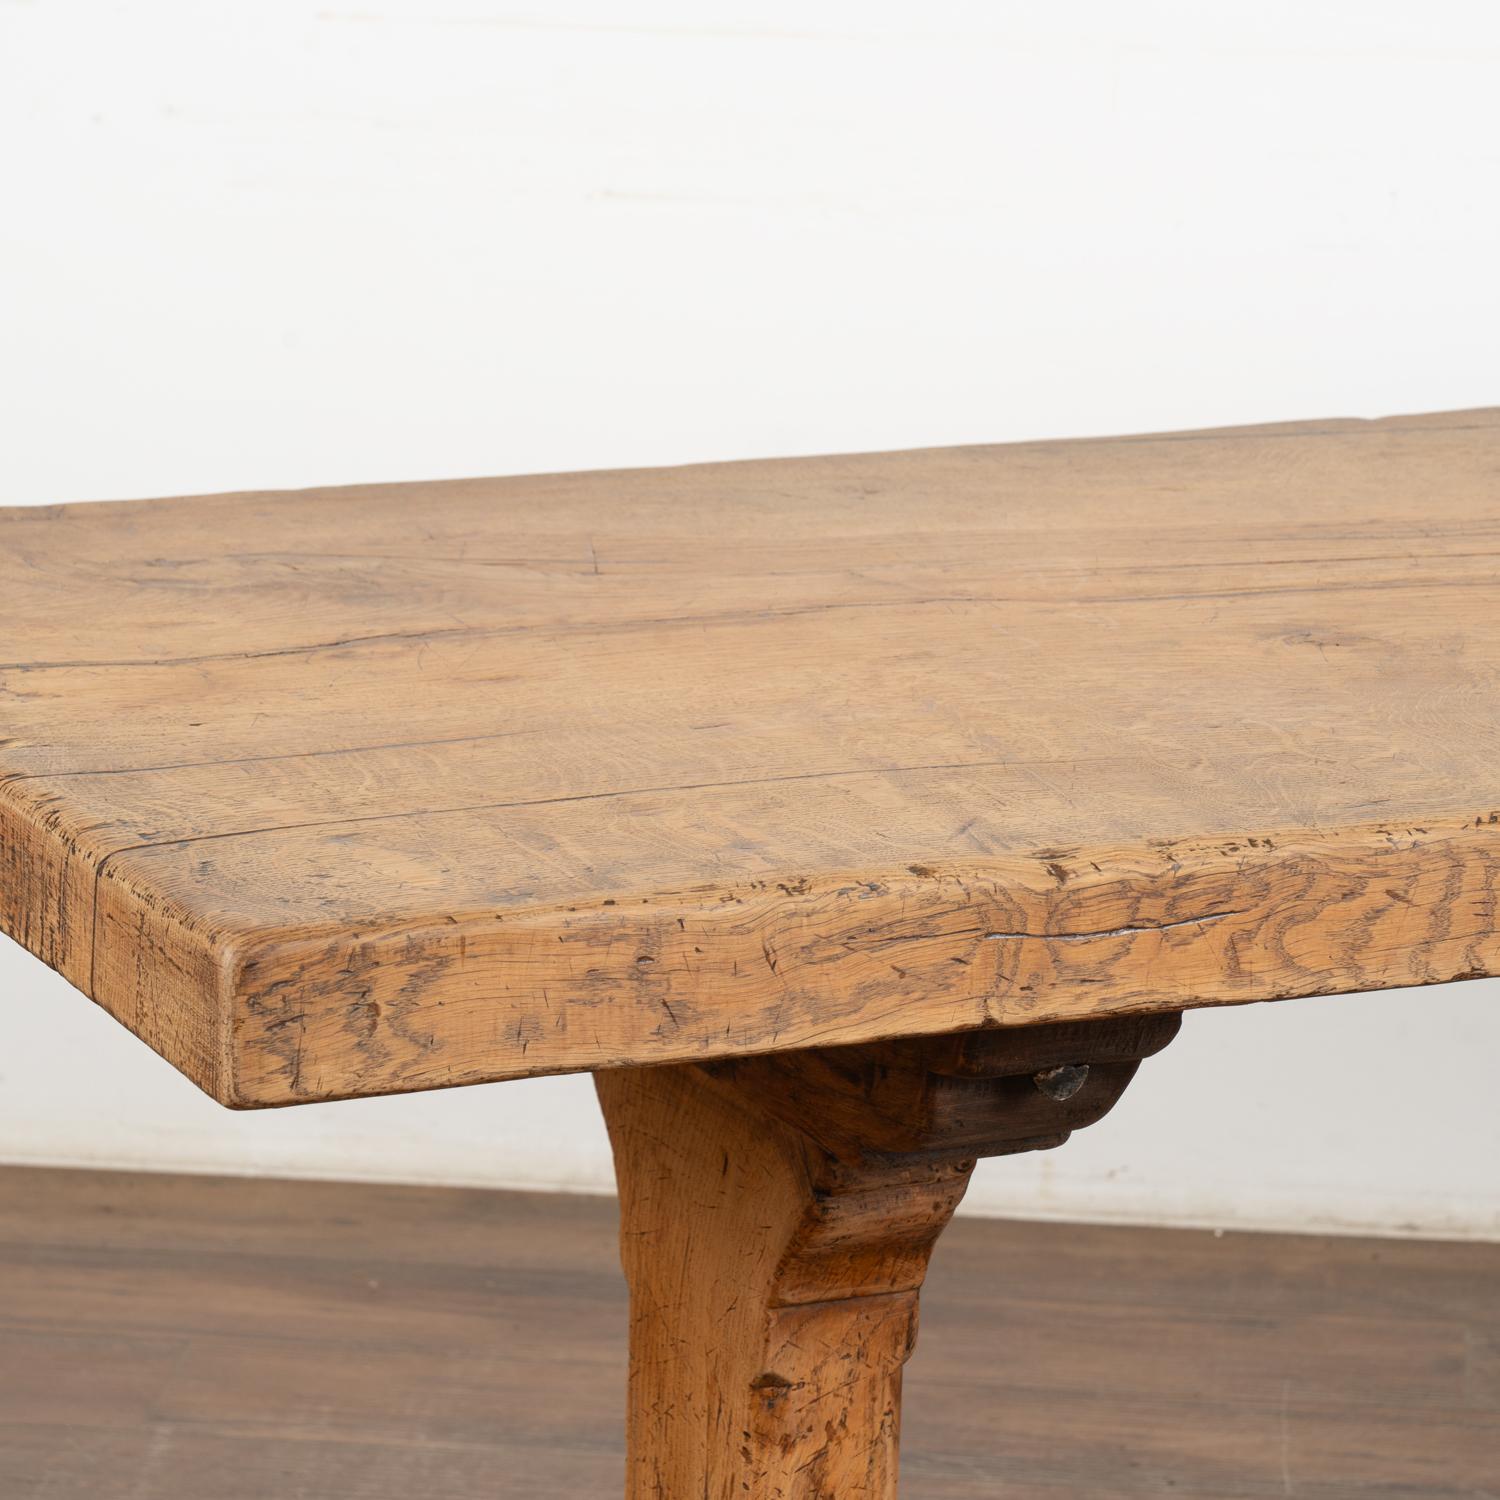 French Country Oak Dining Table, circa 1900-20 For Sale 1